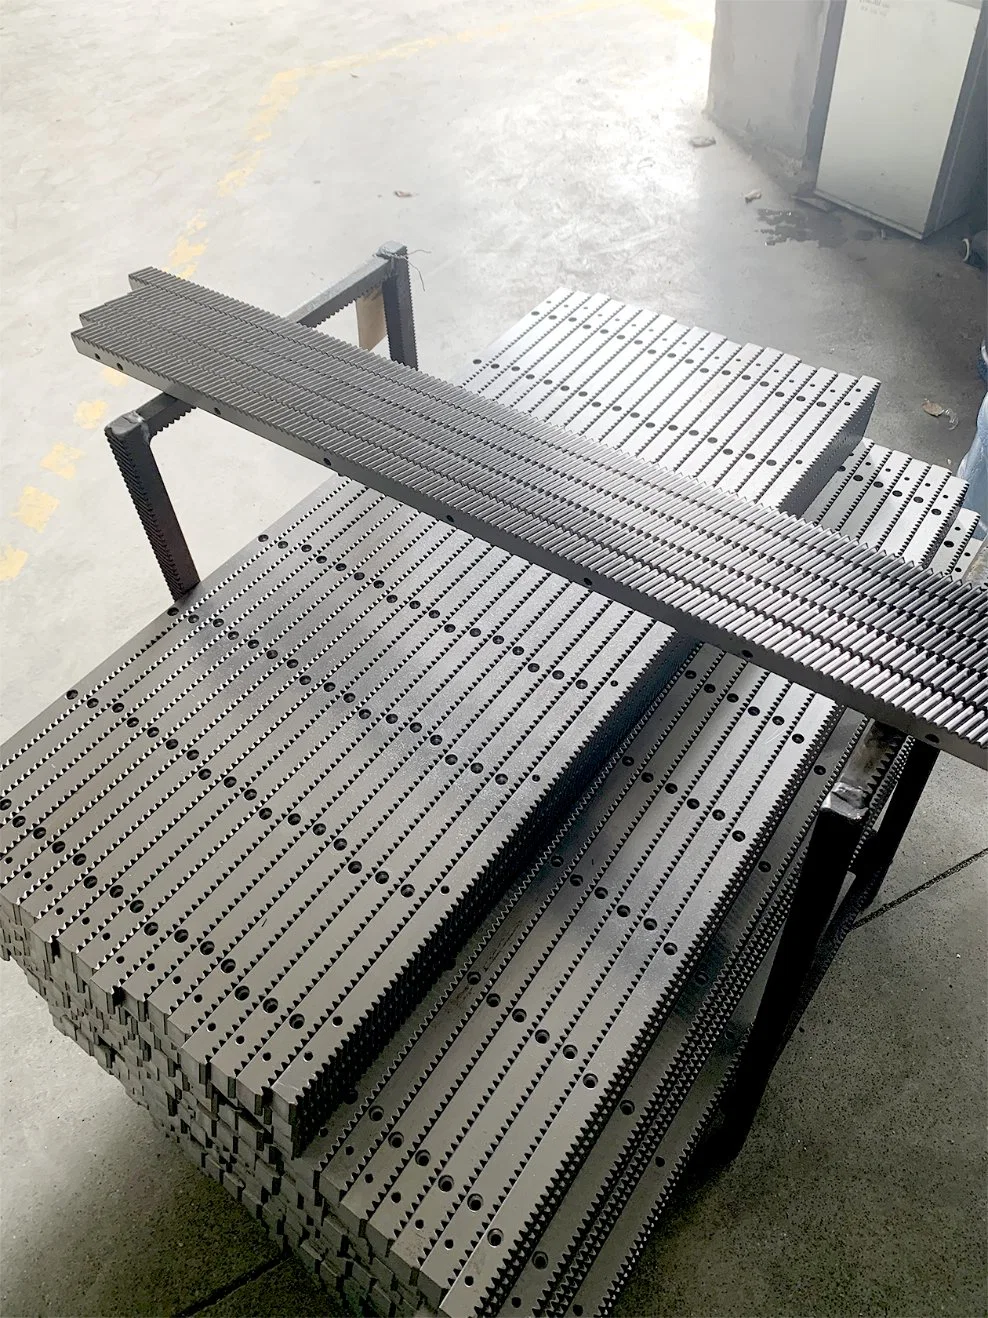 Spur Gear Rack for Linear Motion System